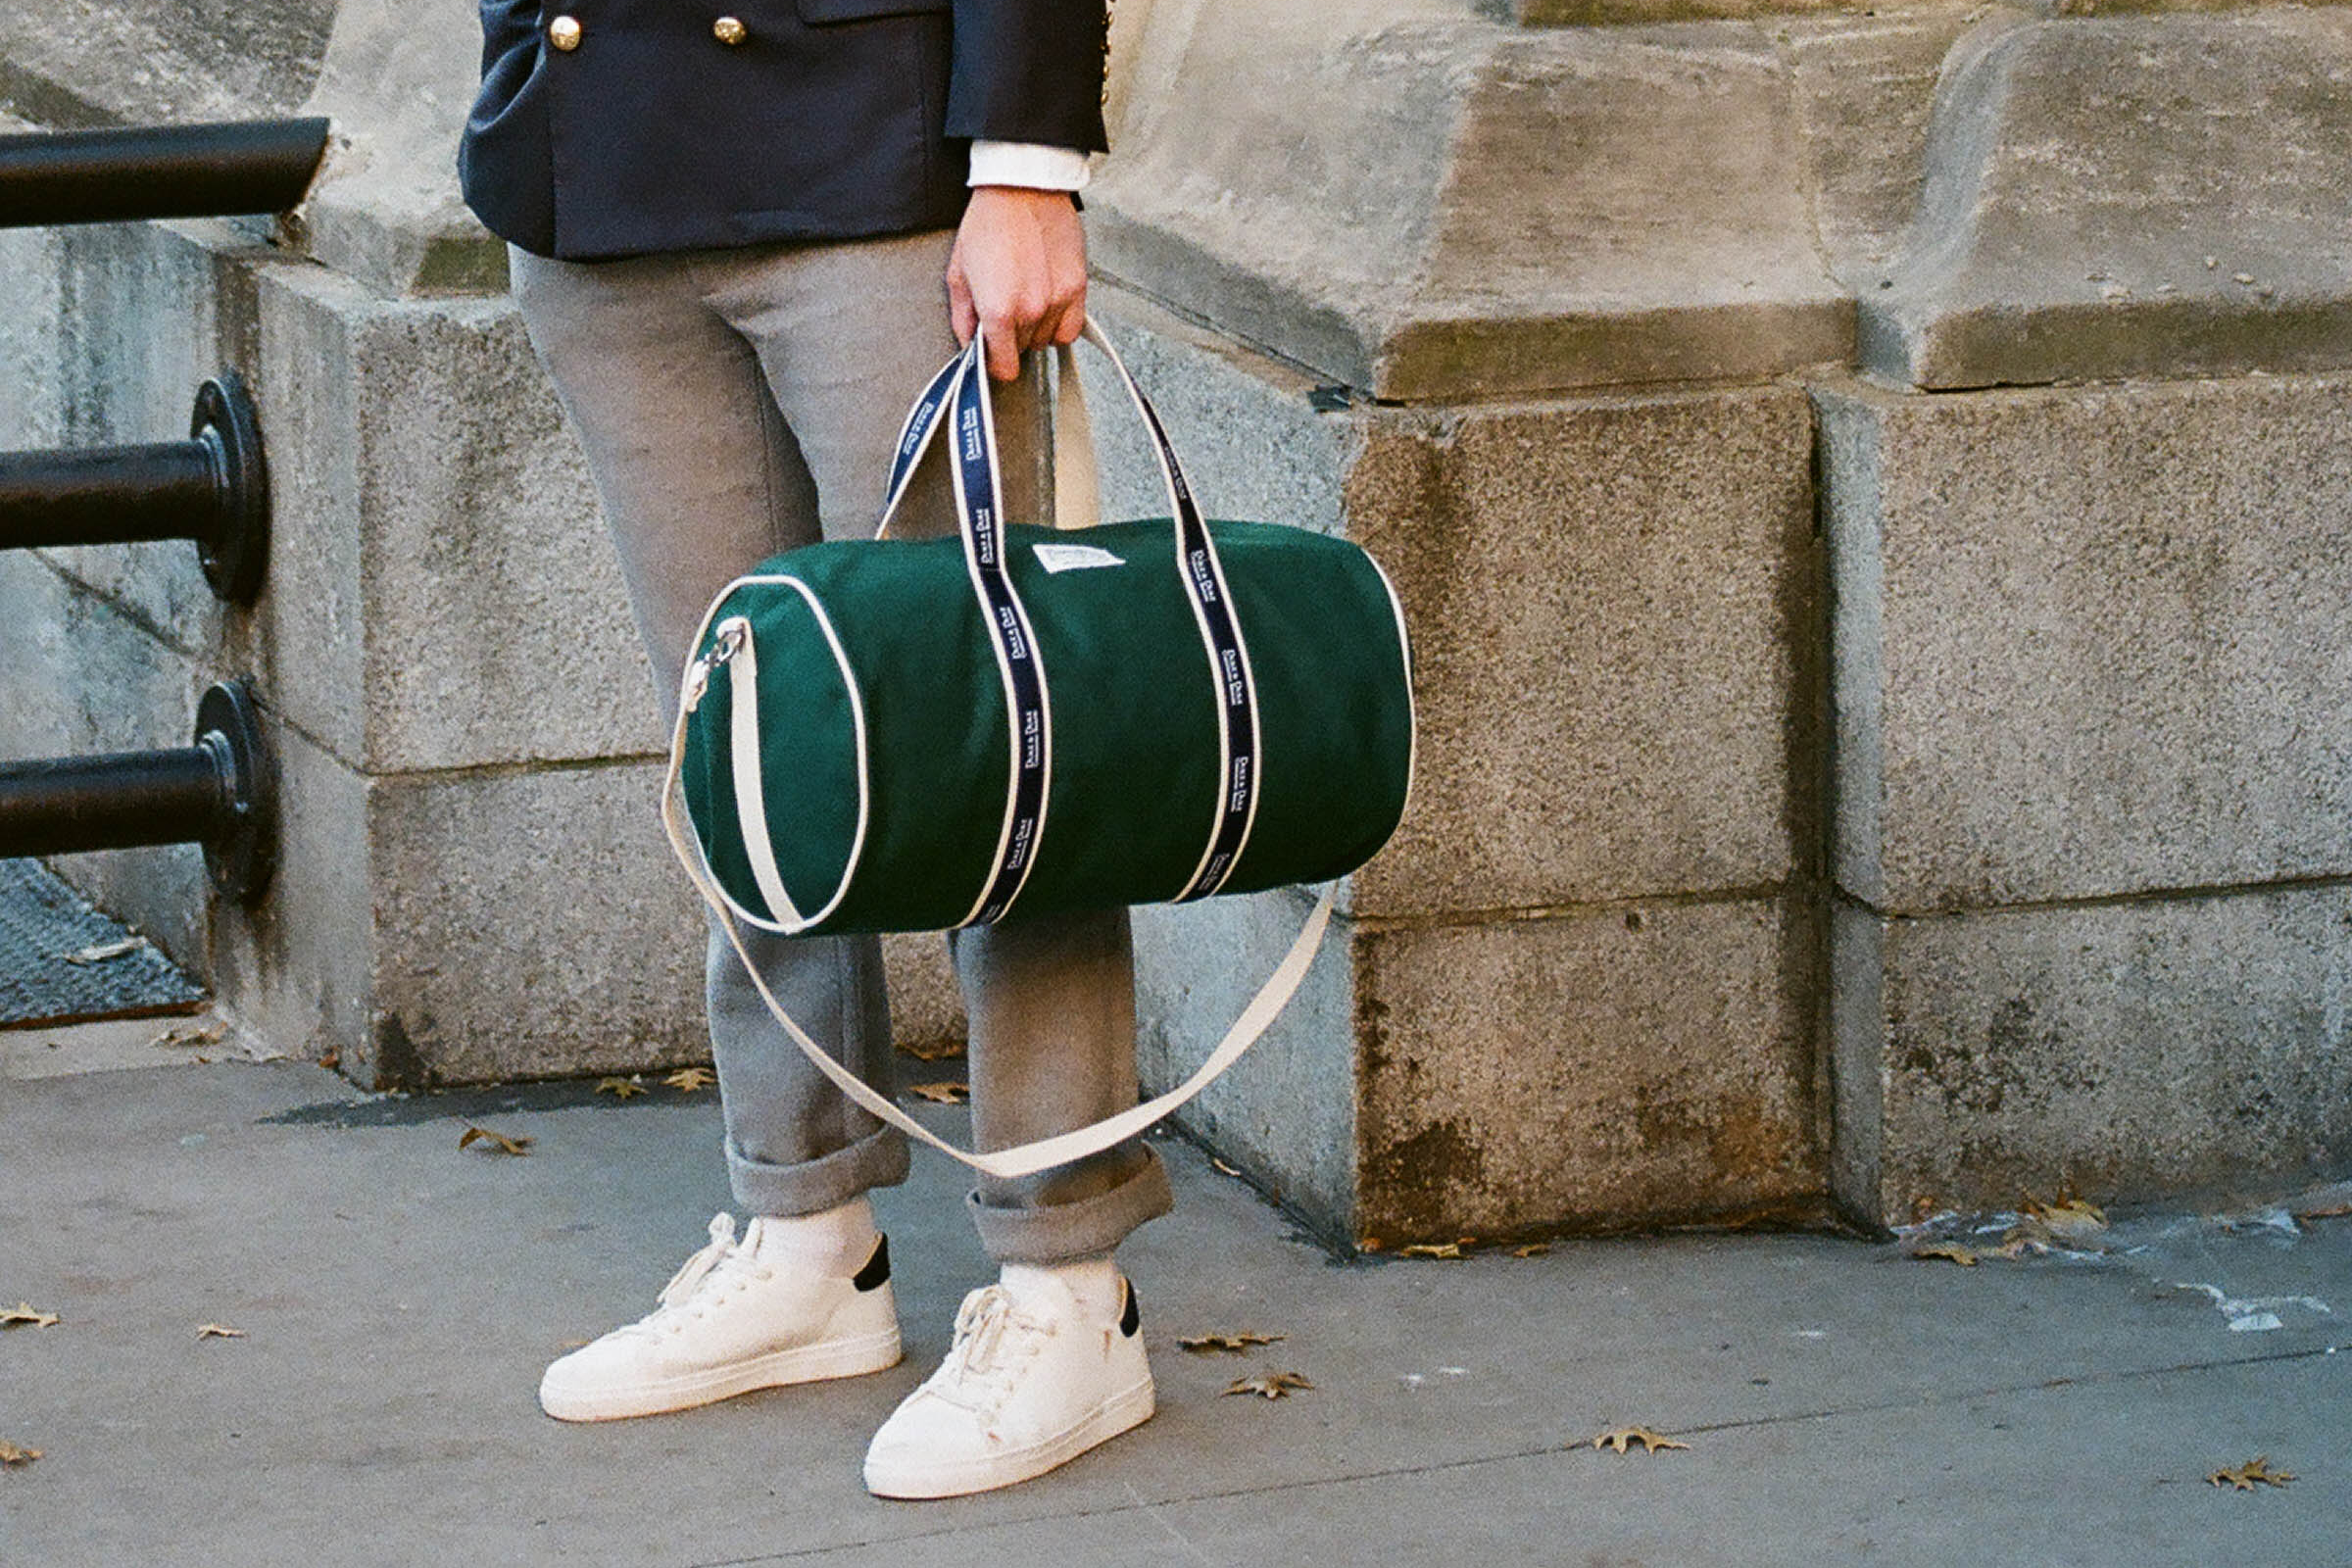 The banker bag might be the next big streetwear accessory